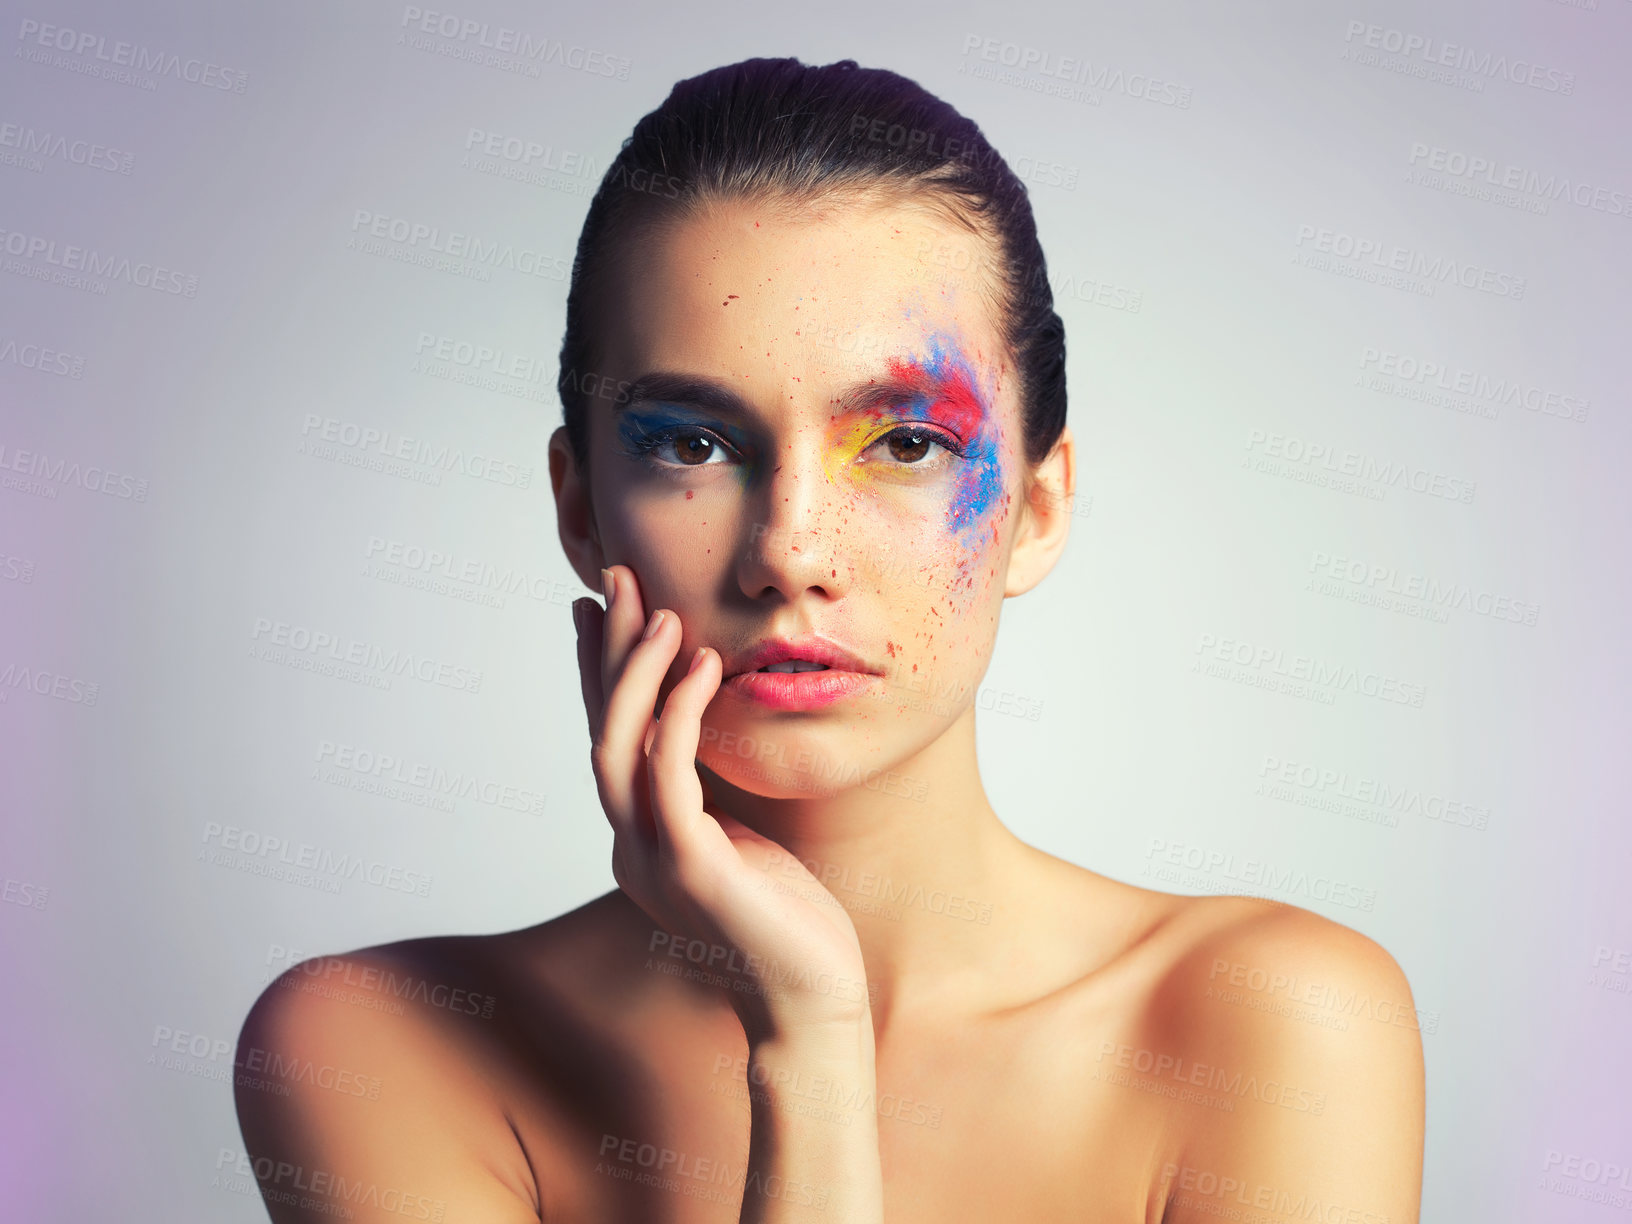 Buy stock photo Studio shot of an attractive young woman posing with her face brightly painted